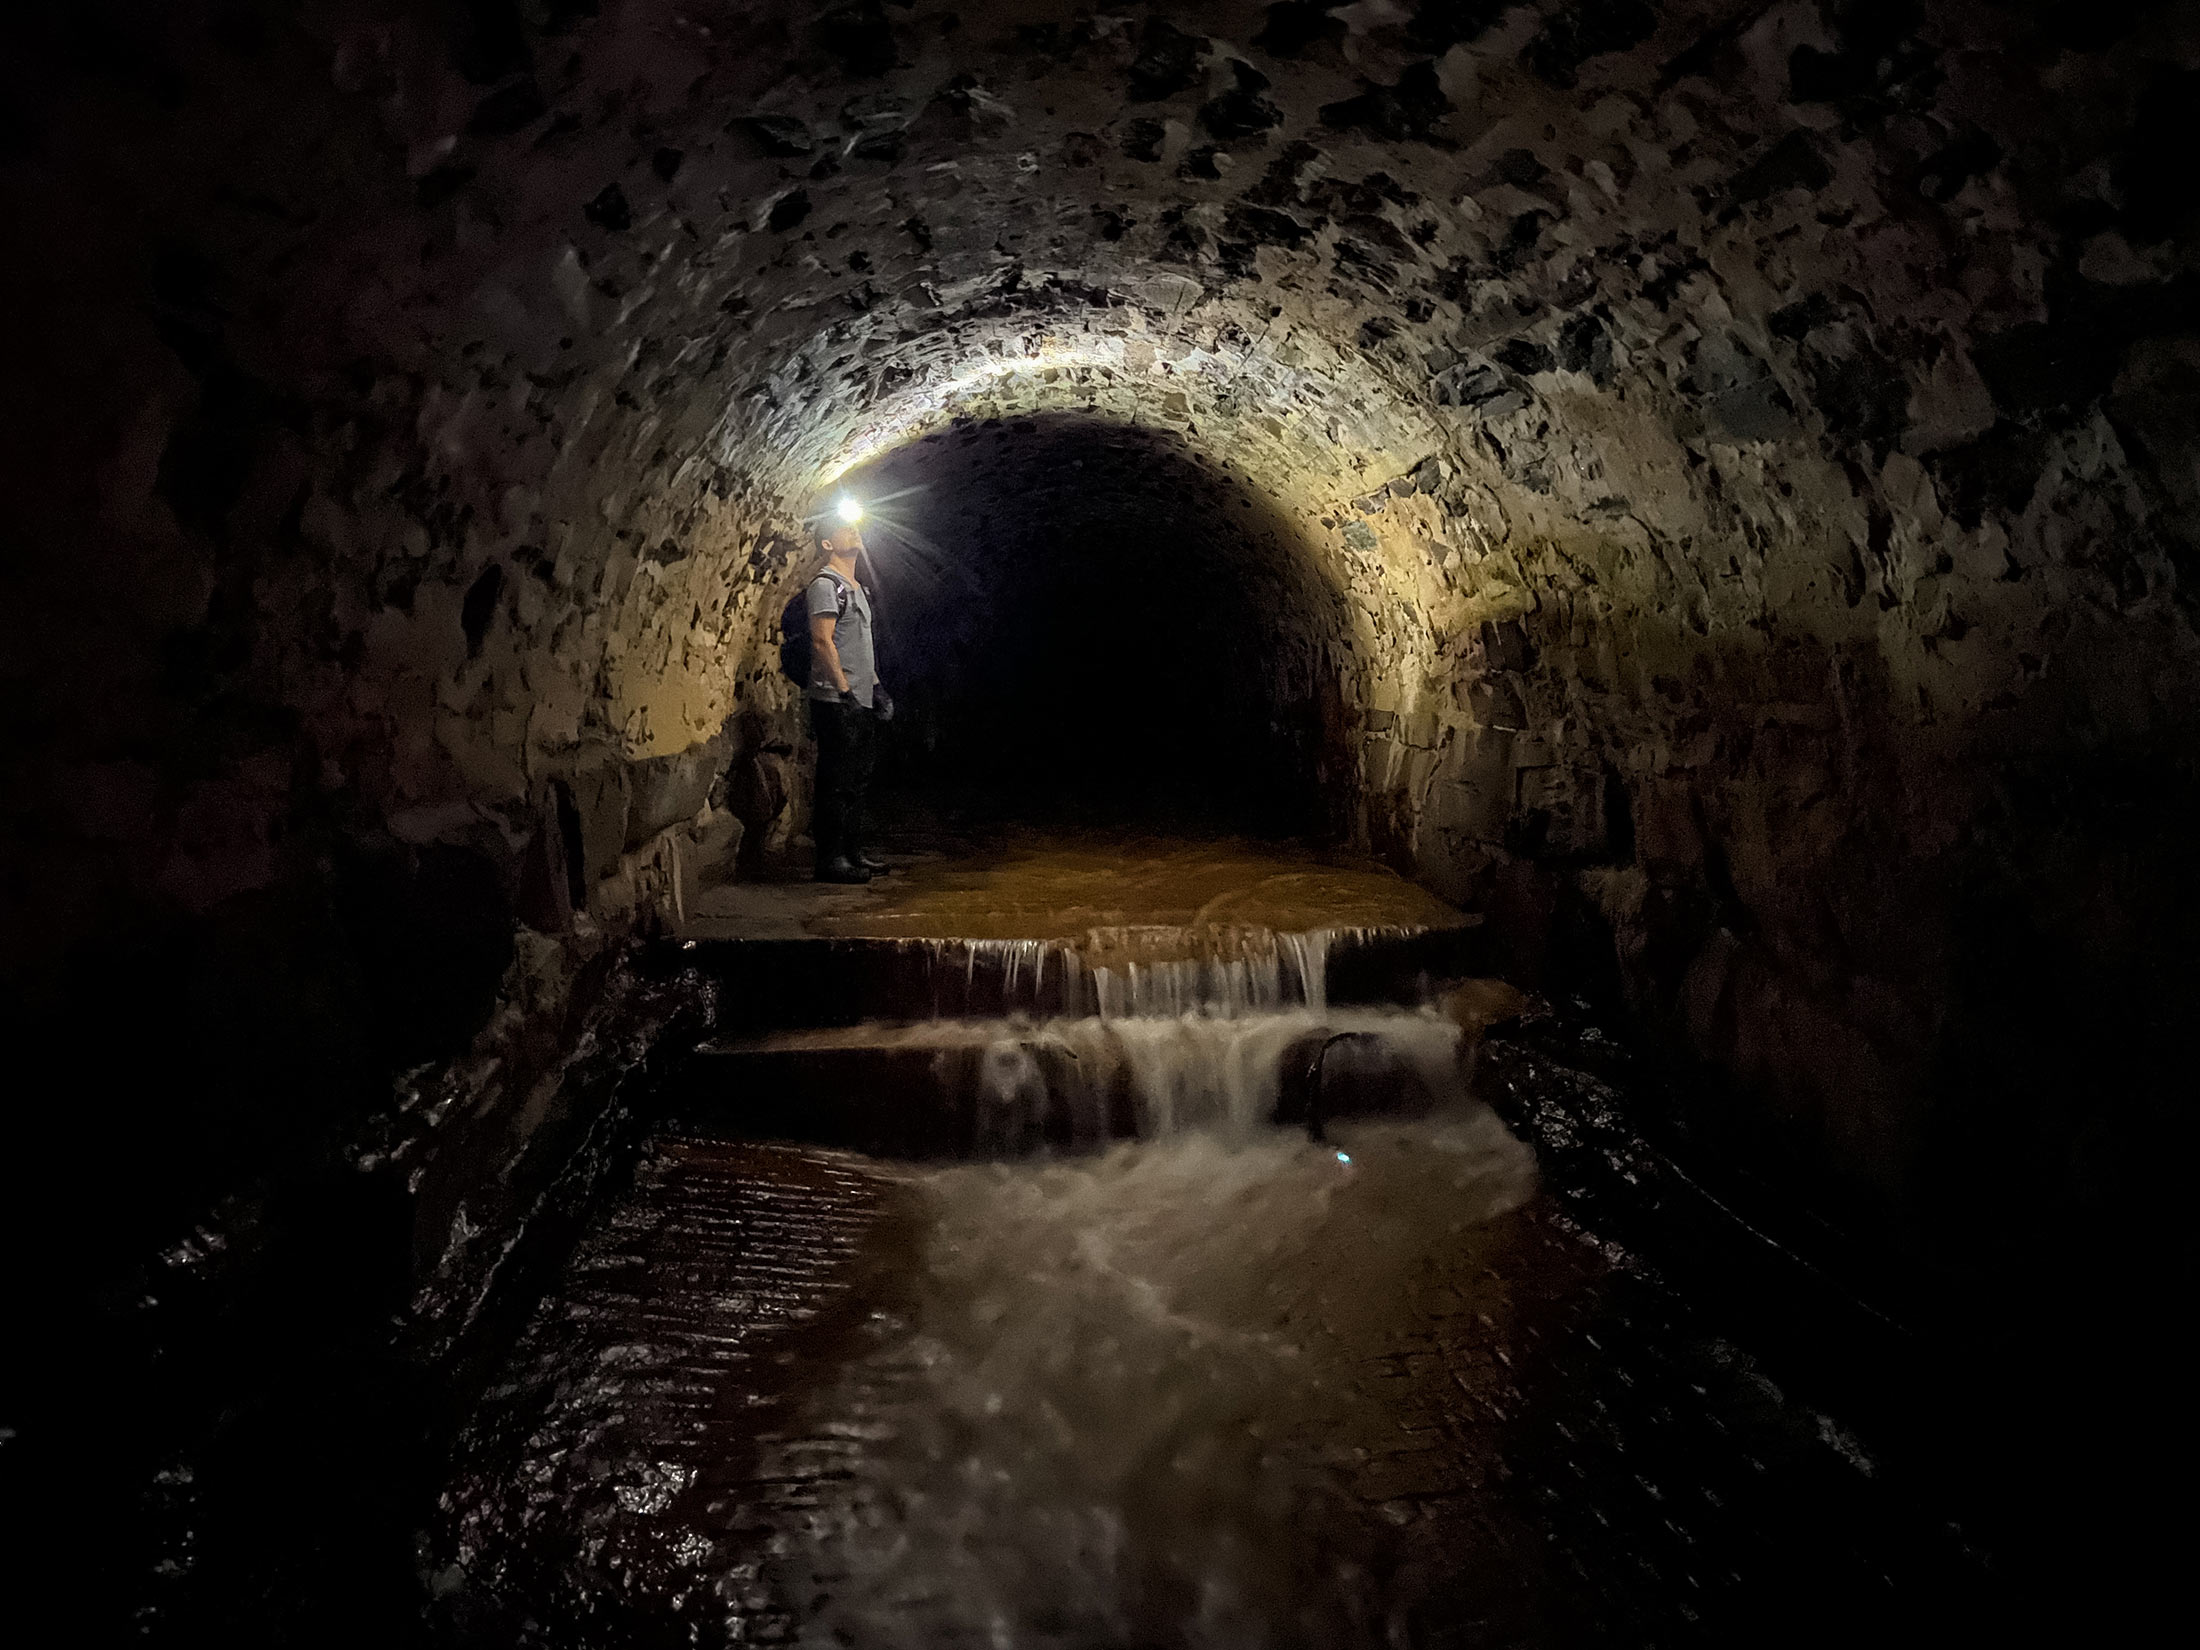 Photos of a man with a headlamp and waders standing in an underground tunnel with an arched stone ceiling. Water cascades through the tunnel down a set of steps.